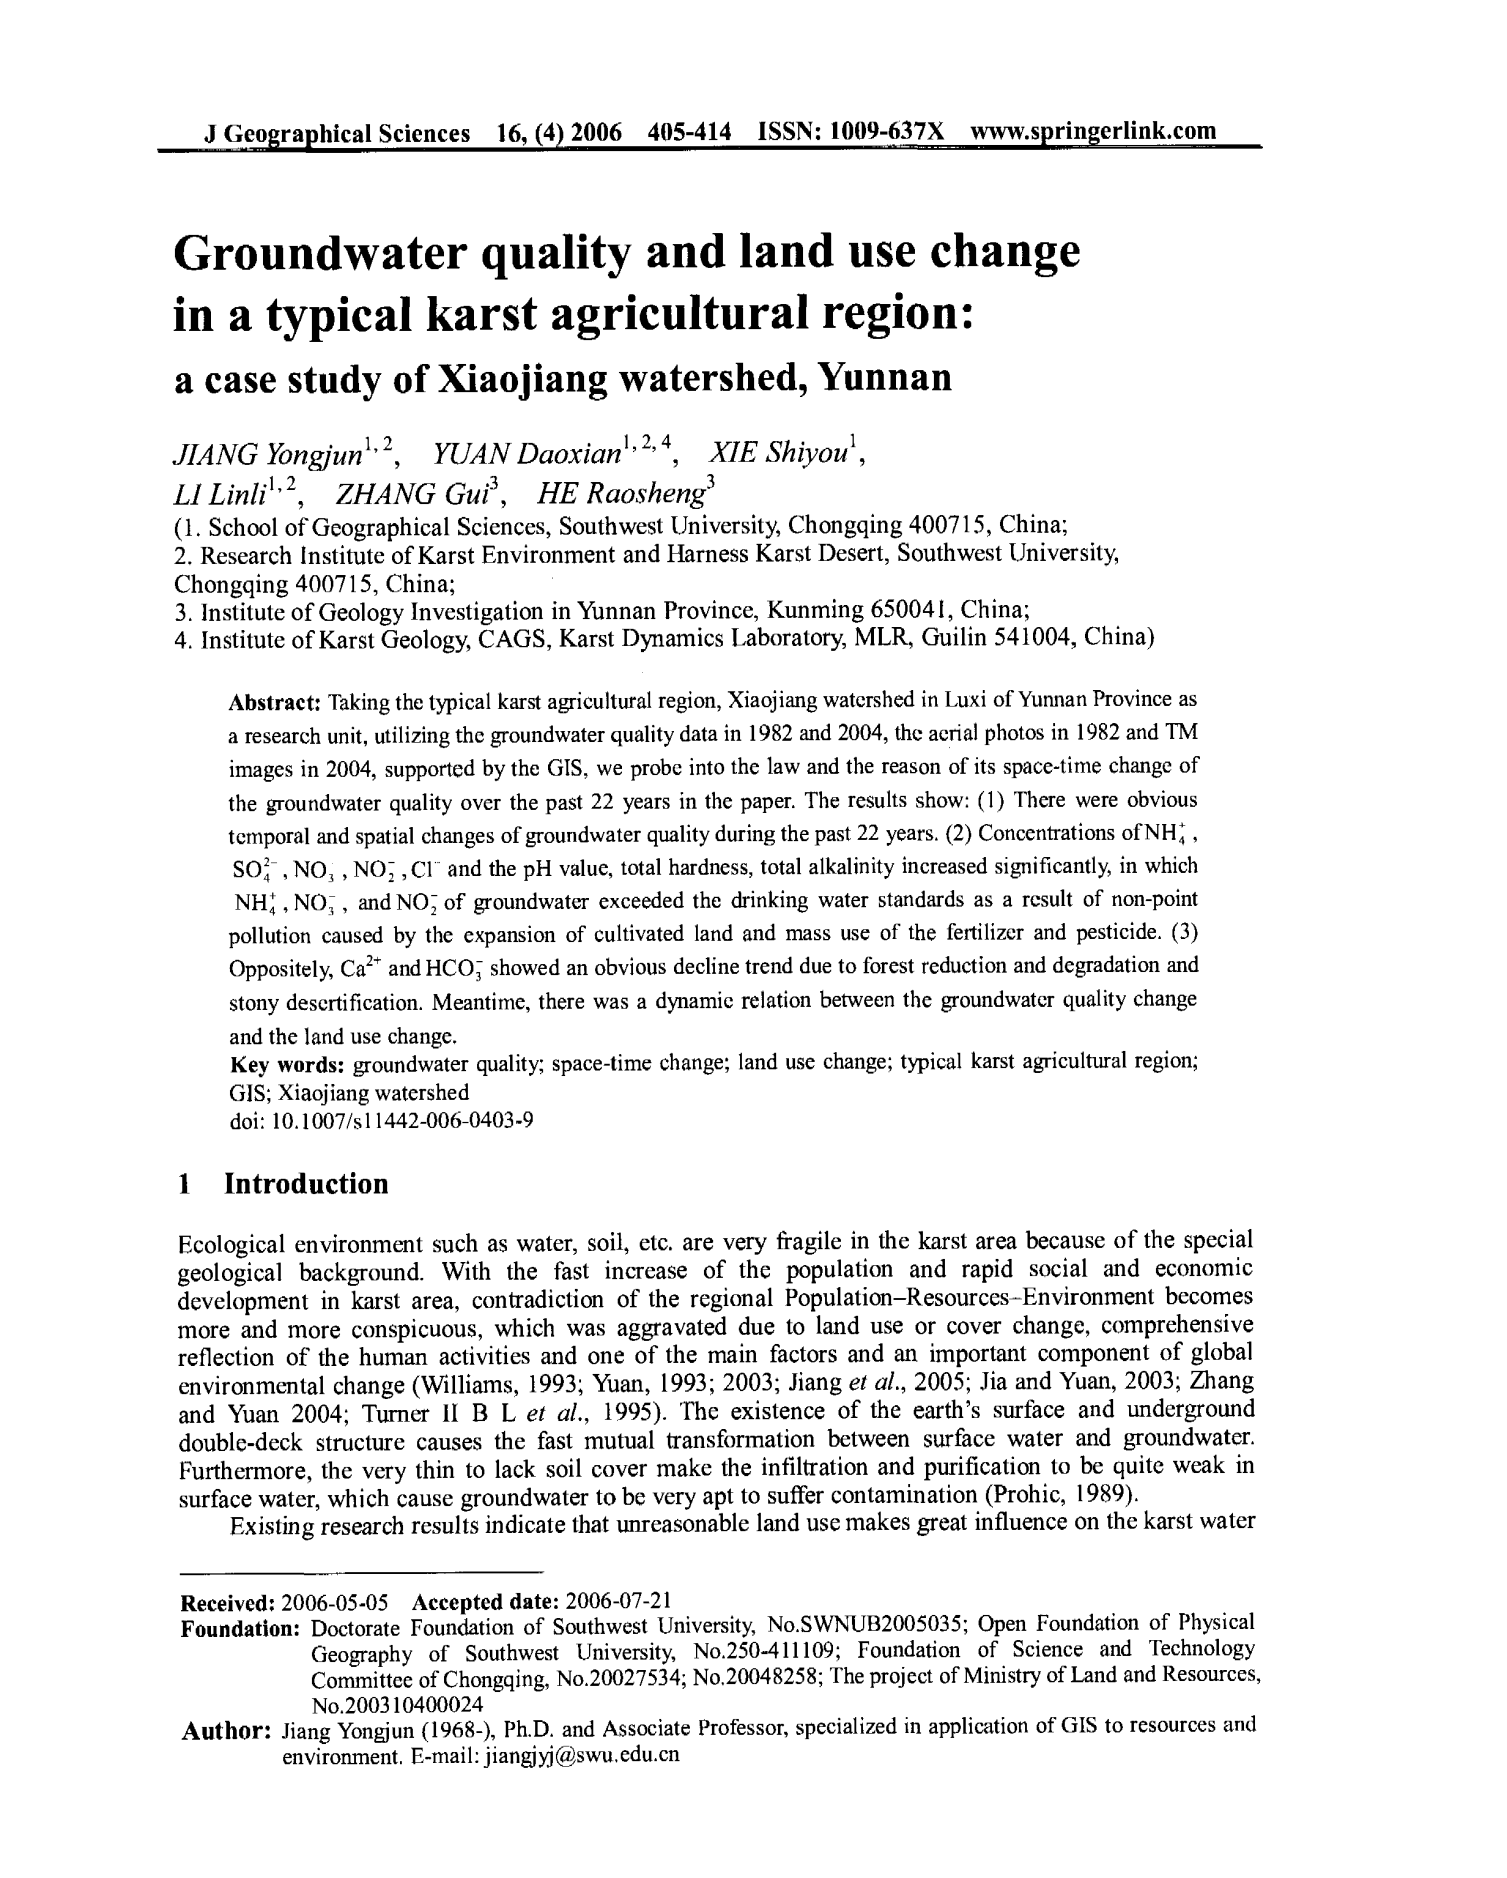 Groundwater quality and land use change in a typical karst agricultural region： a case study of